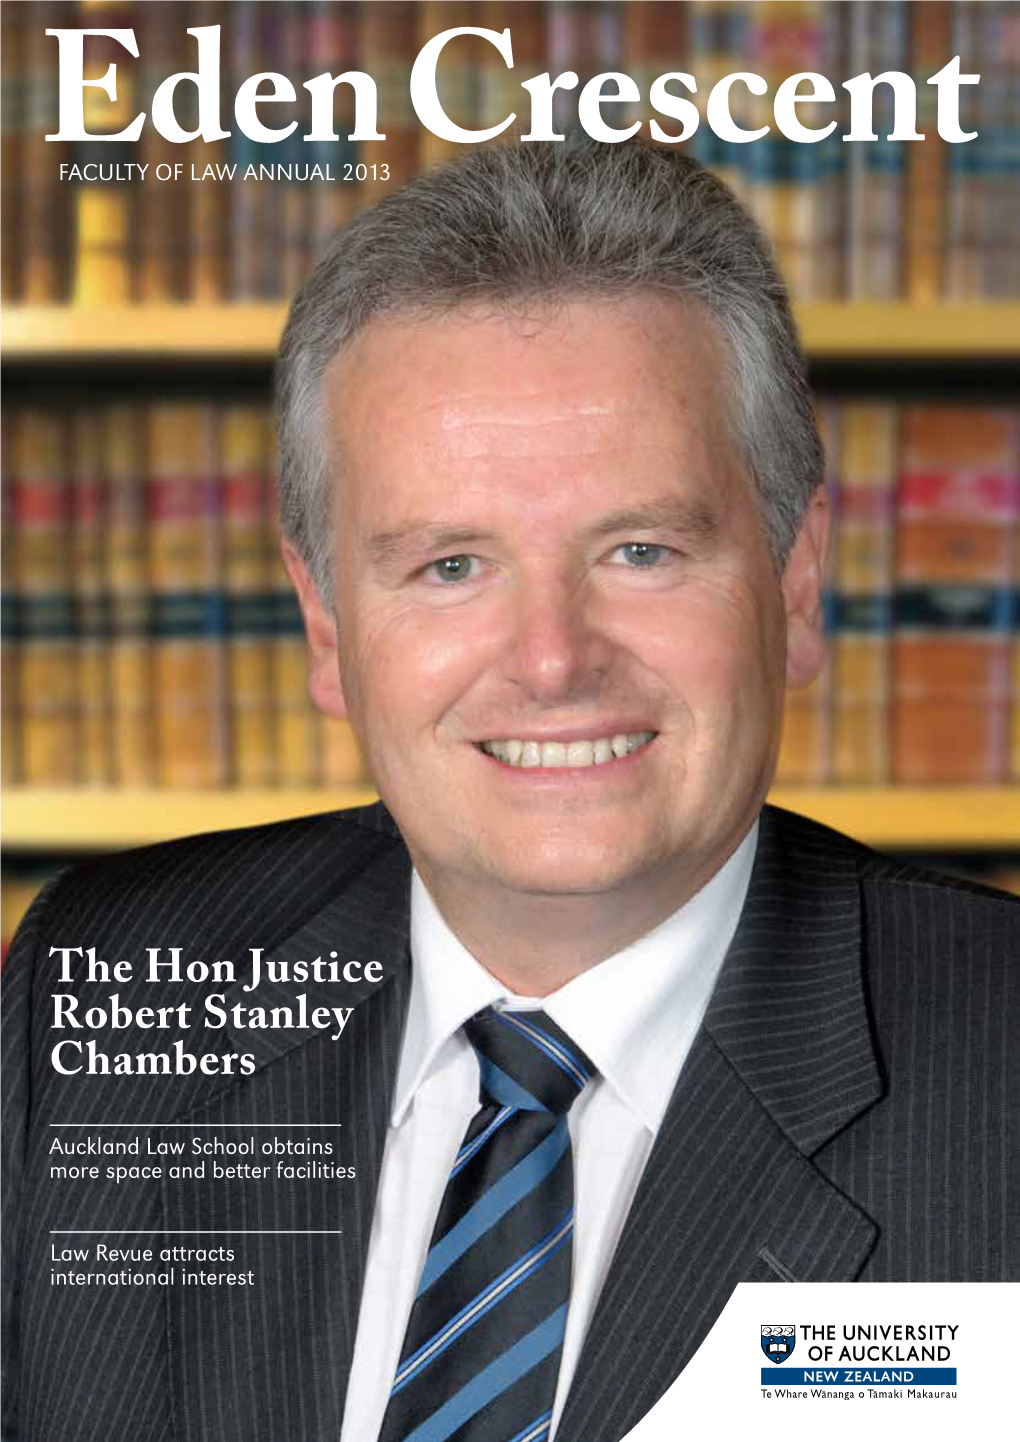 The Hon Justice Robert Stanley Chambers